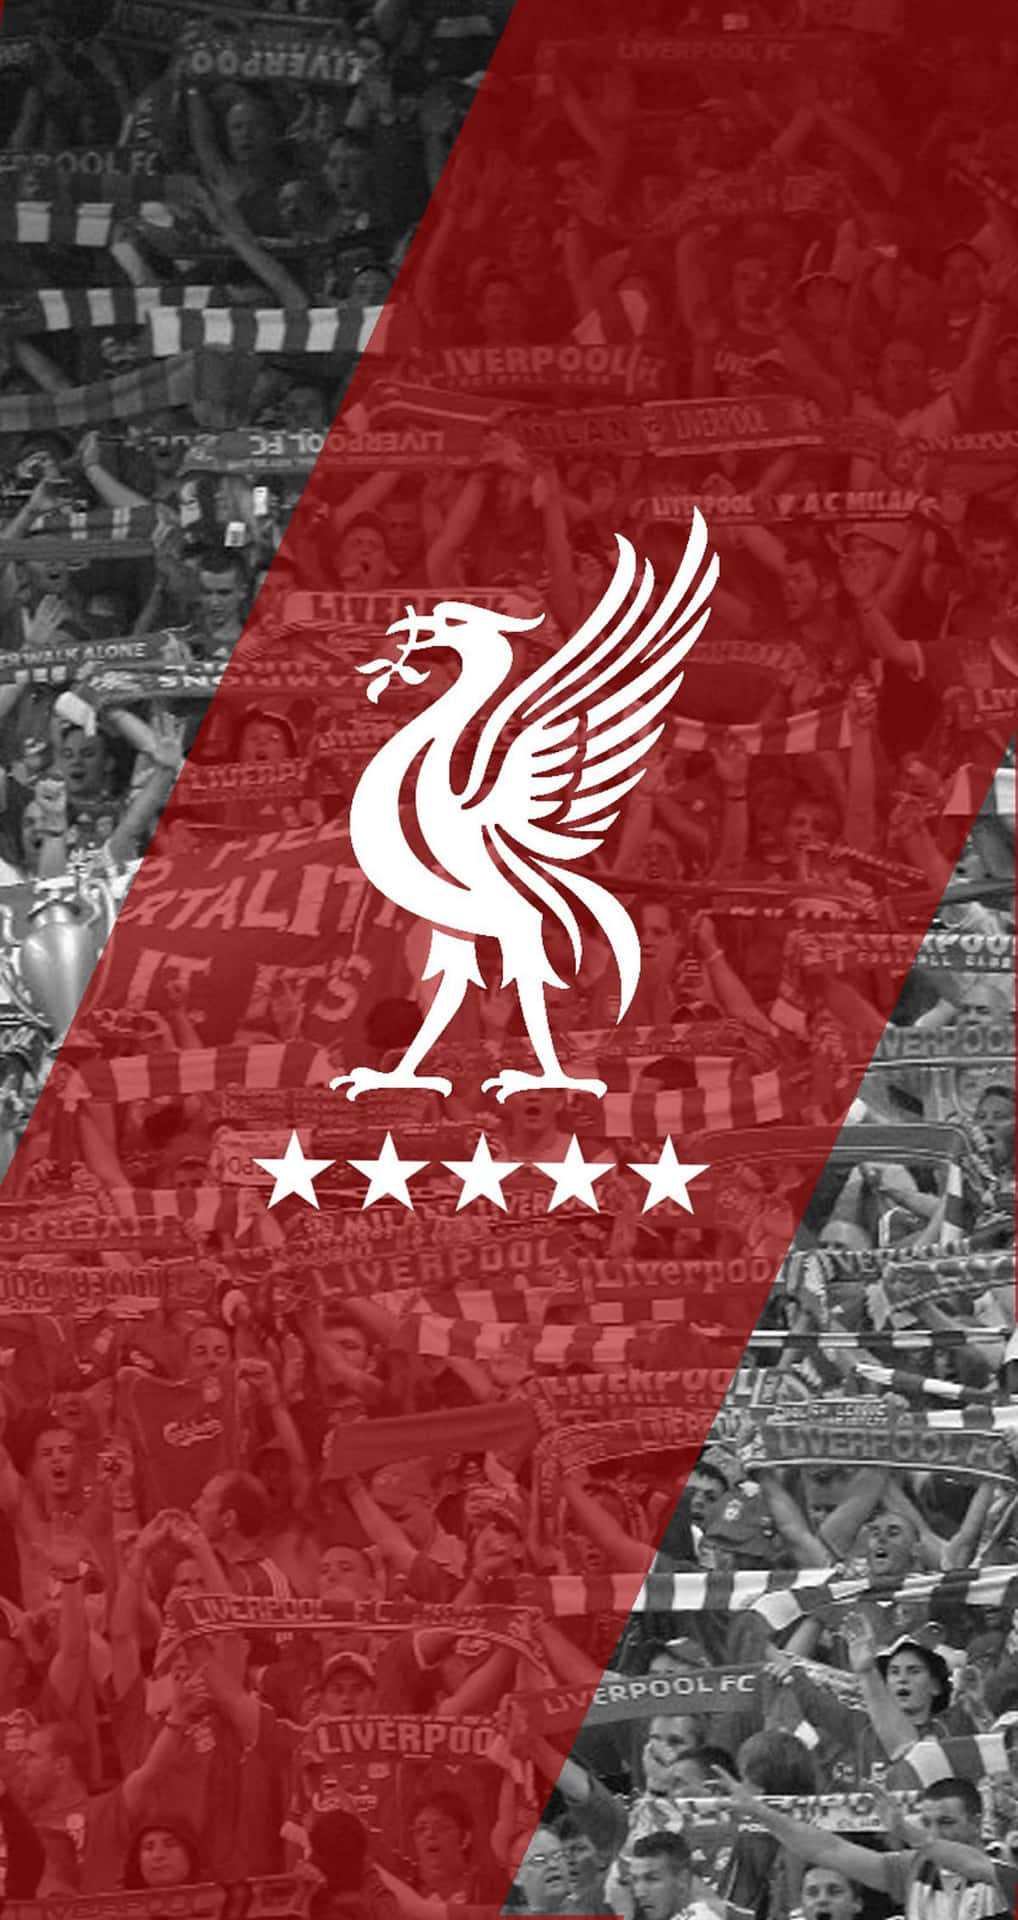 Unlock your potential with Liverpool's Iphone Wallpaper